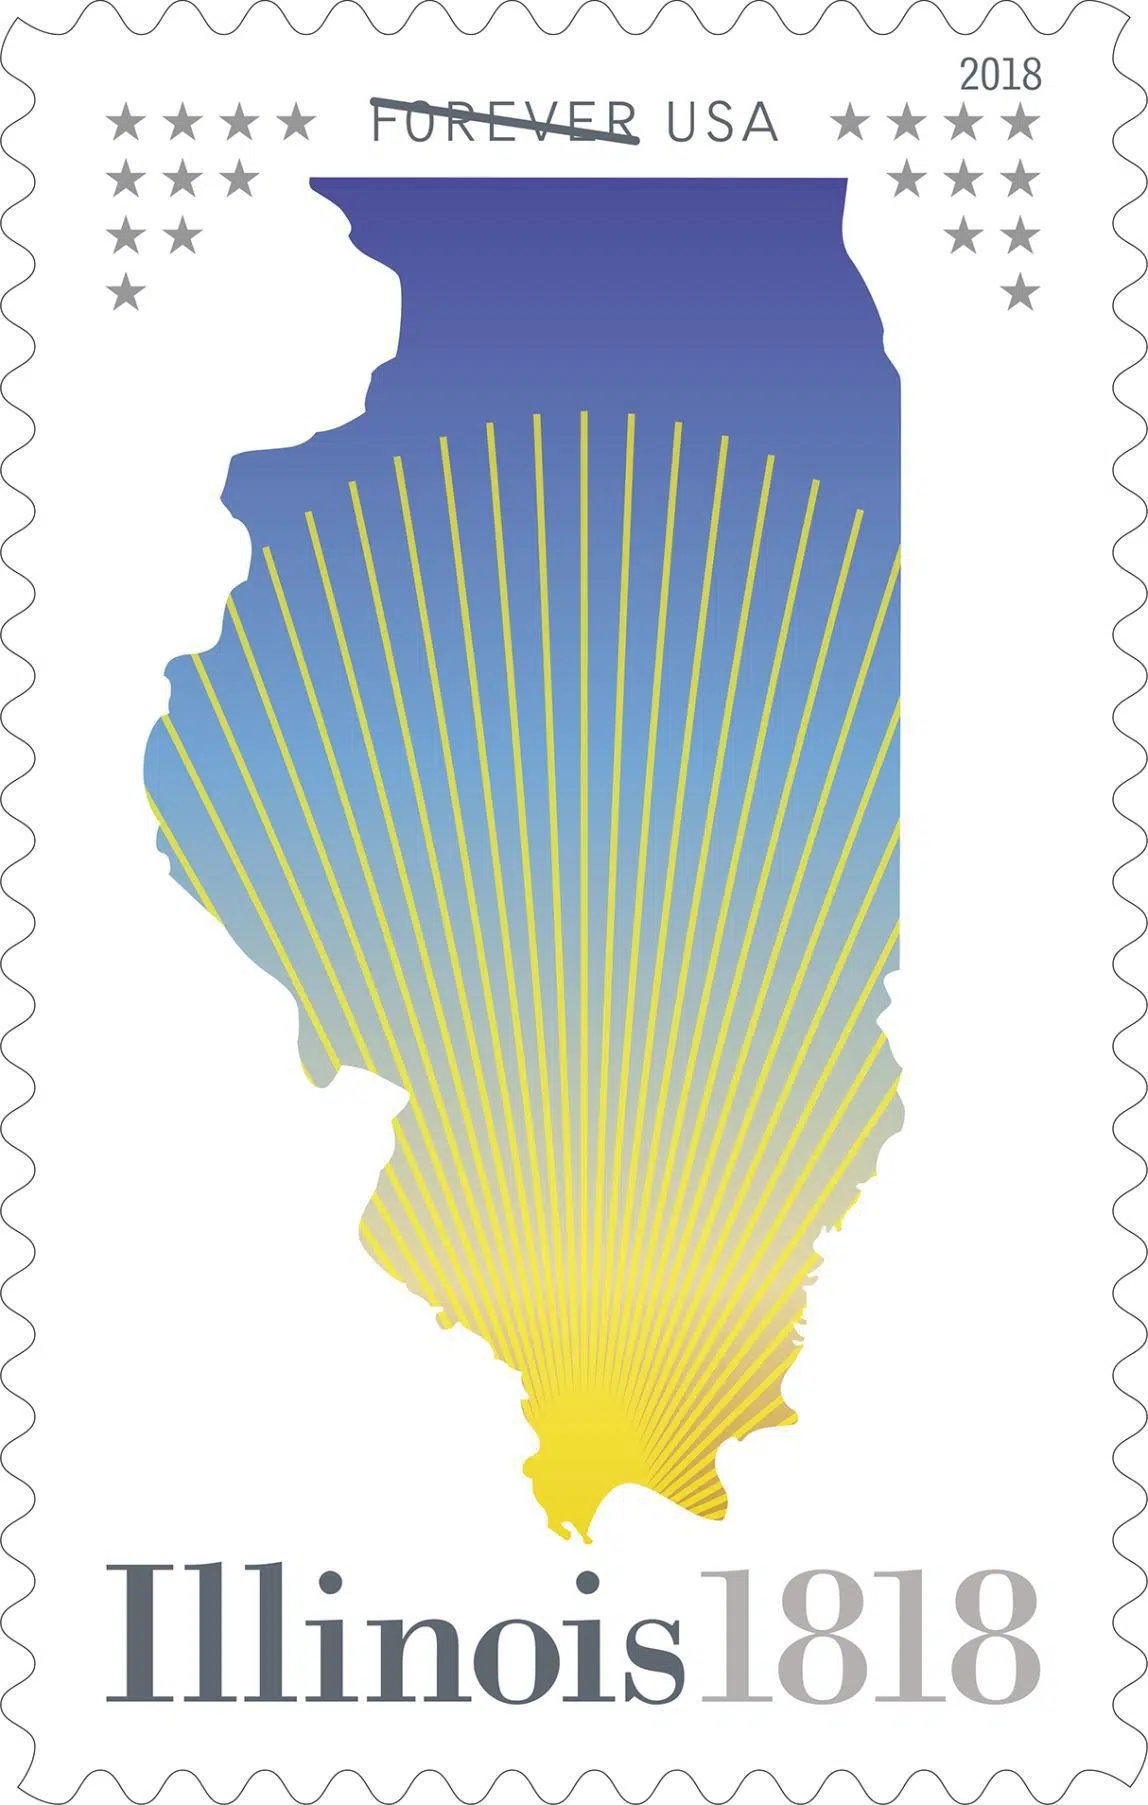 Illinois Gets Bicentennial Forever Stamp